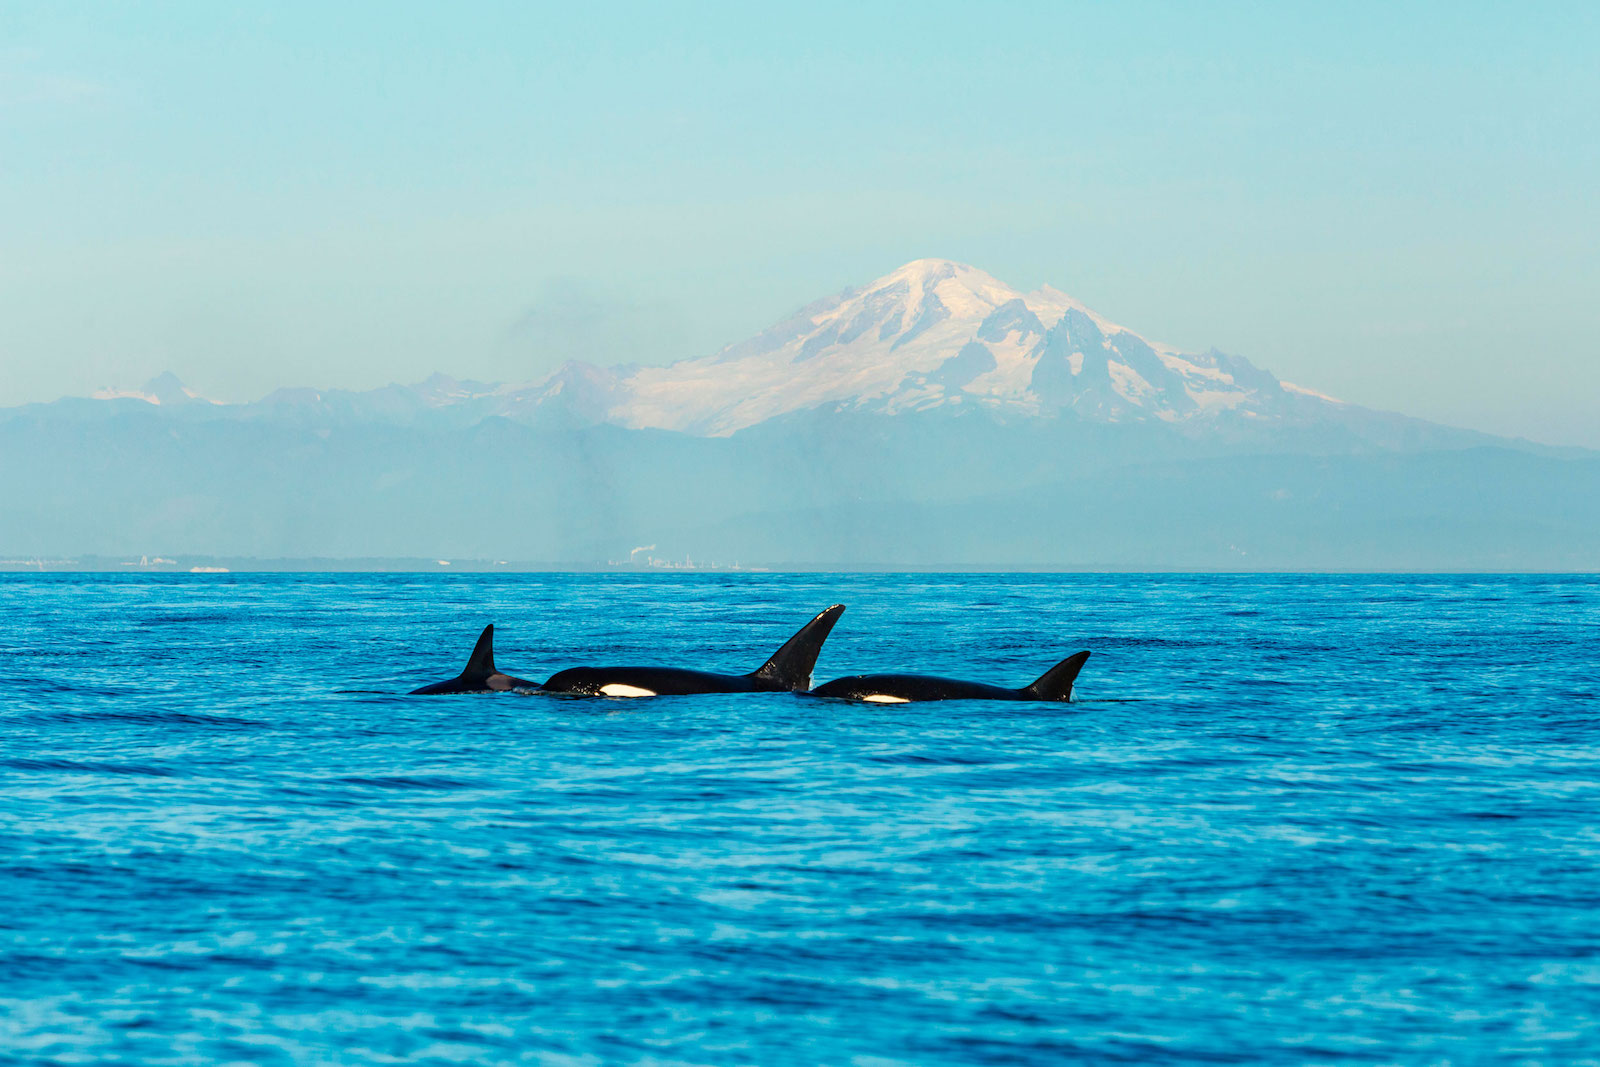 Three transient killer whales swim by in a blue ocean, against the backdrop of a snowy mountain.